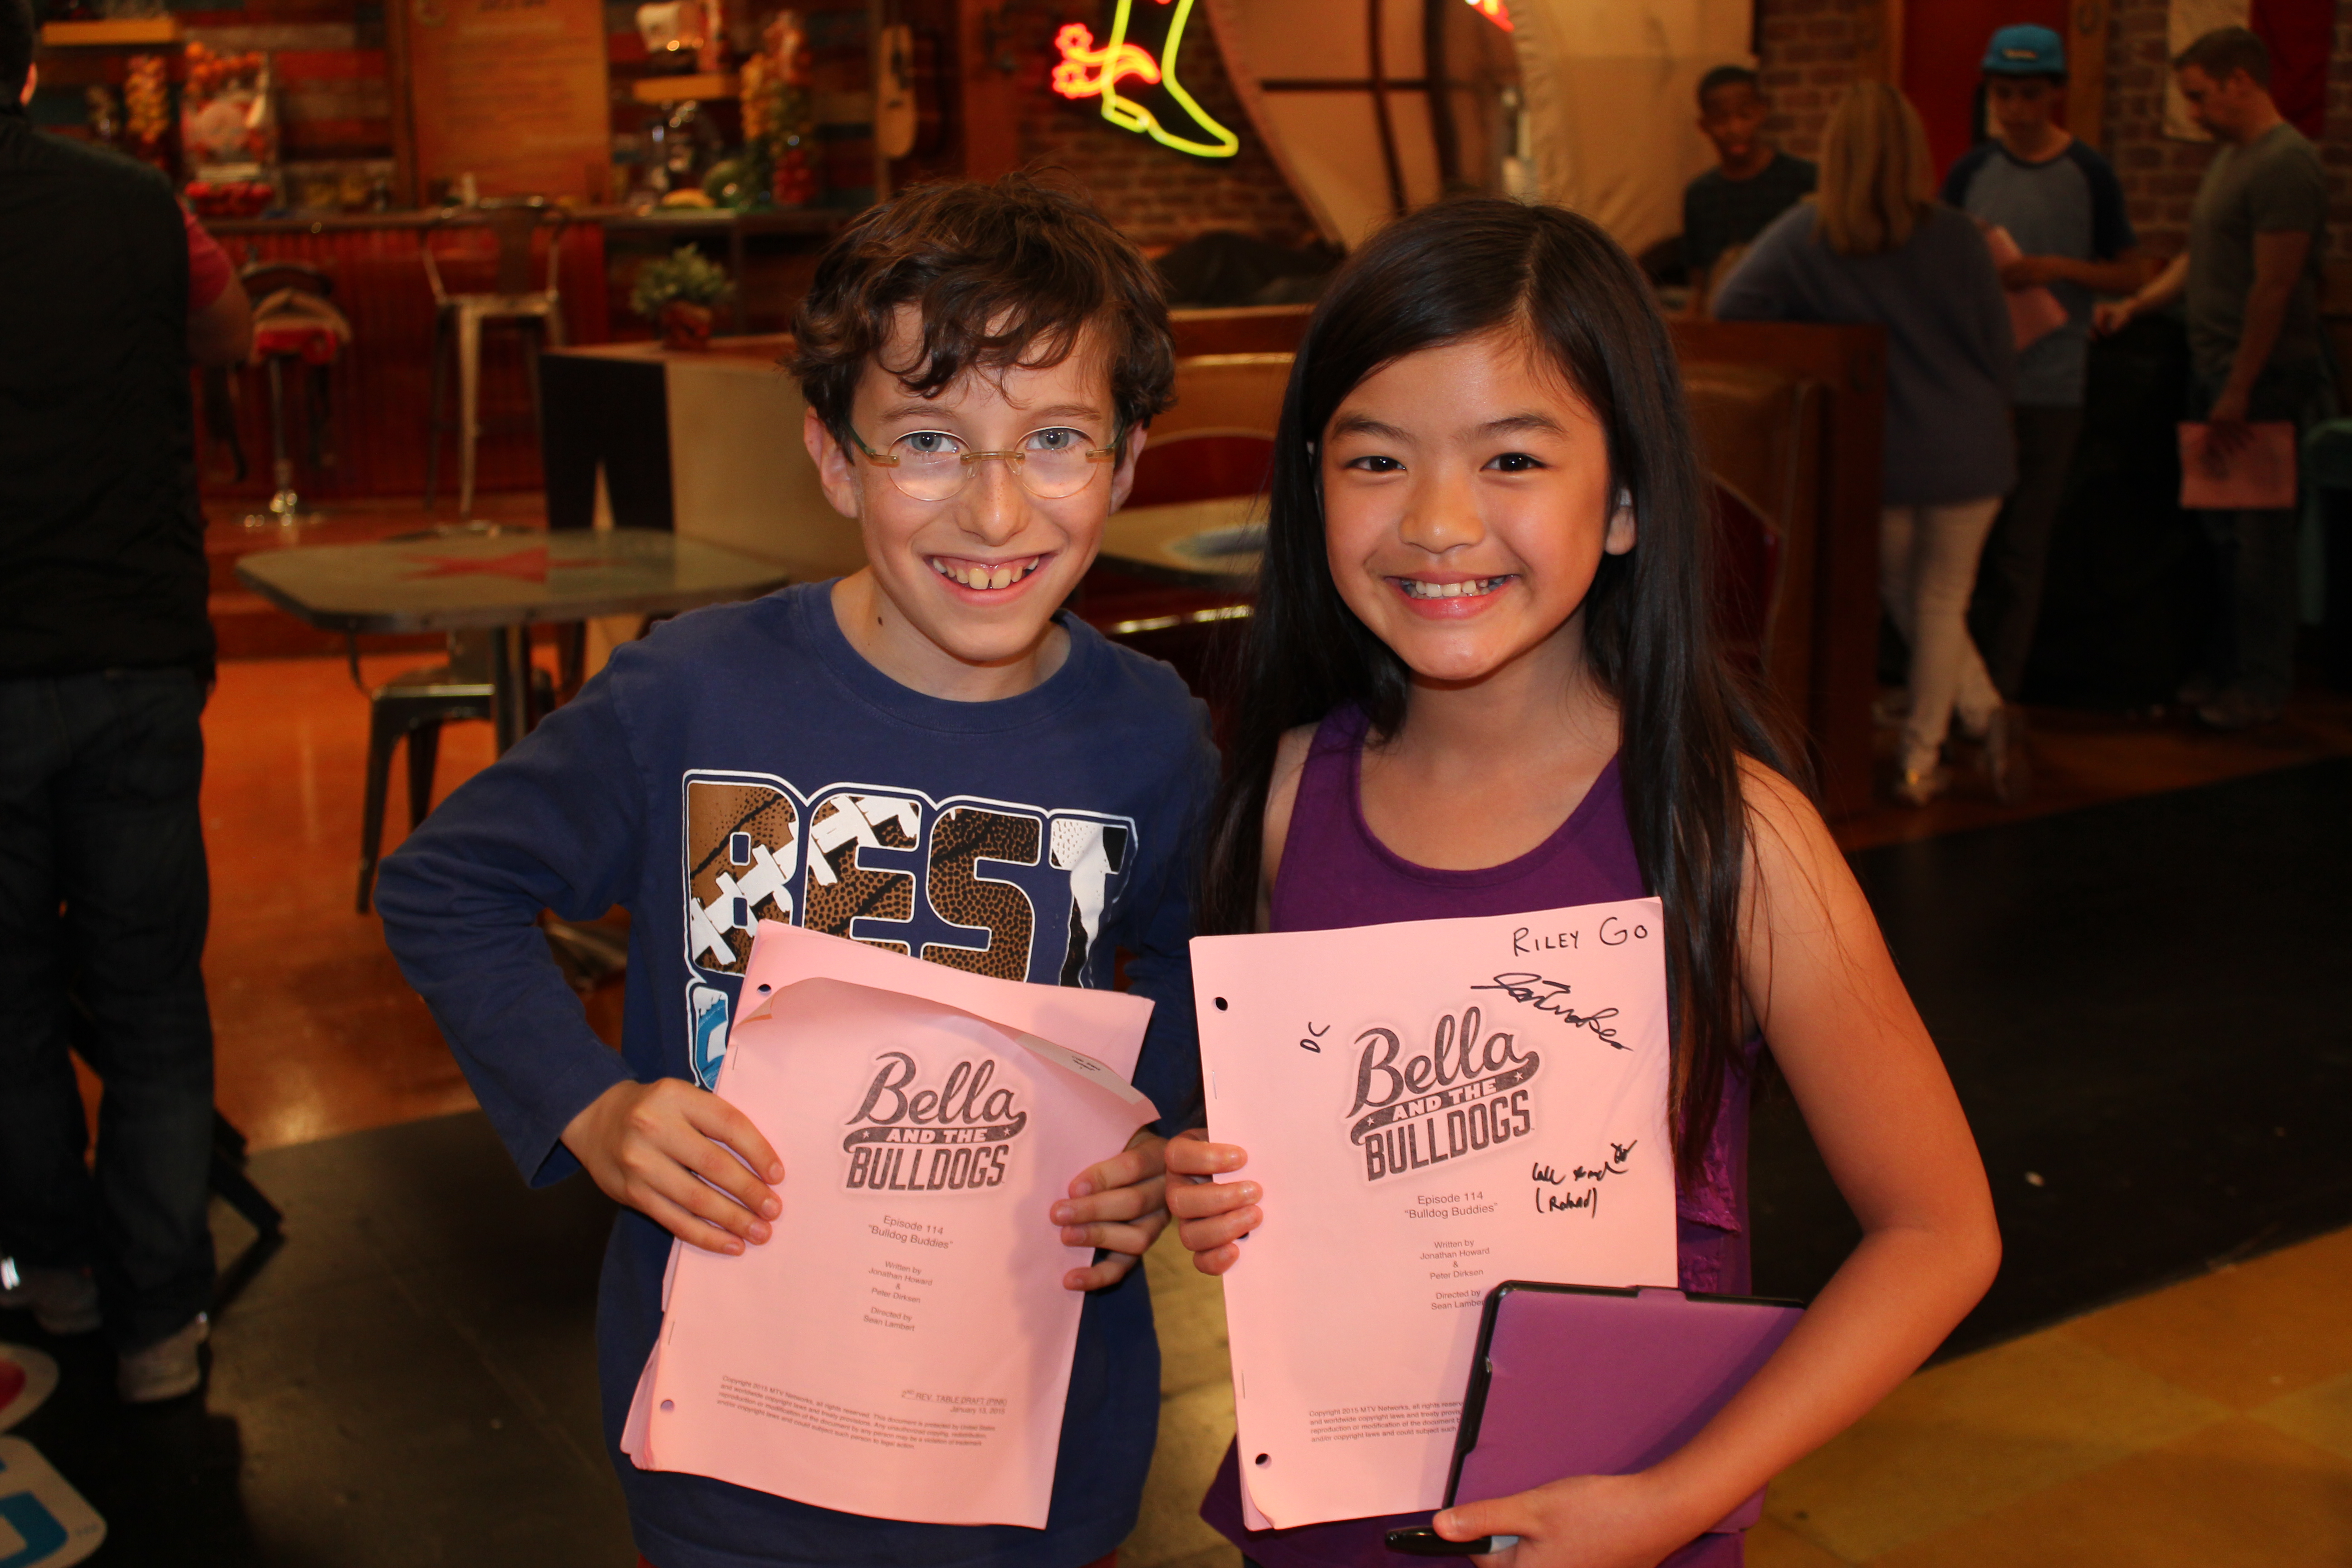 Cole Sand and Riley Go on the set of Nickelodeon's Bella and the Bulldogs.